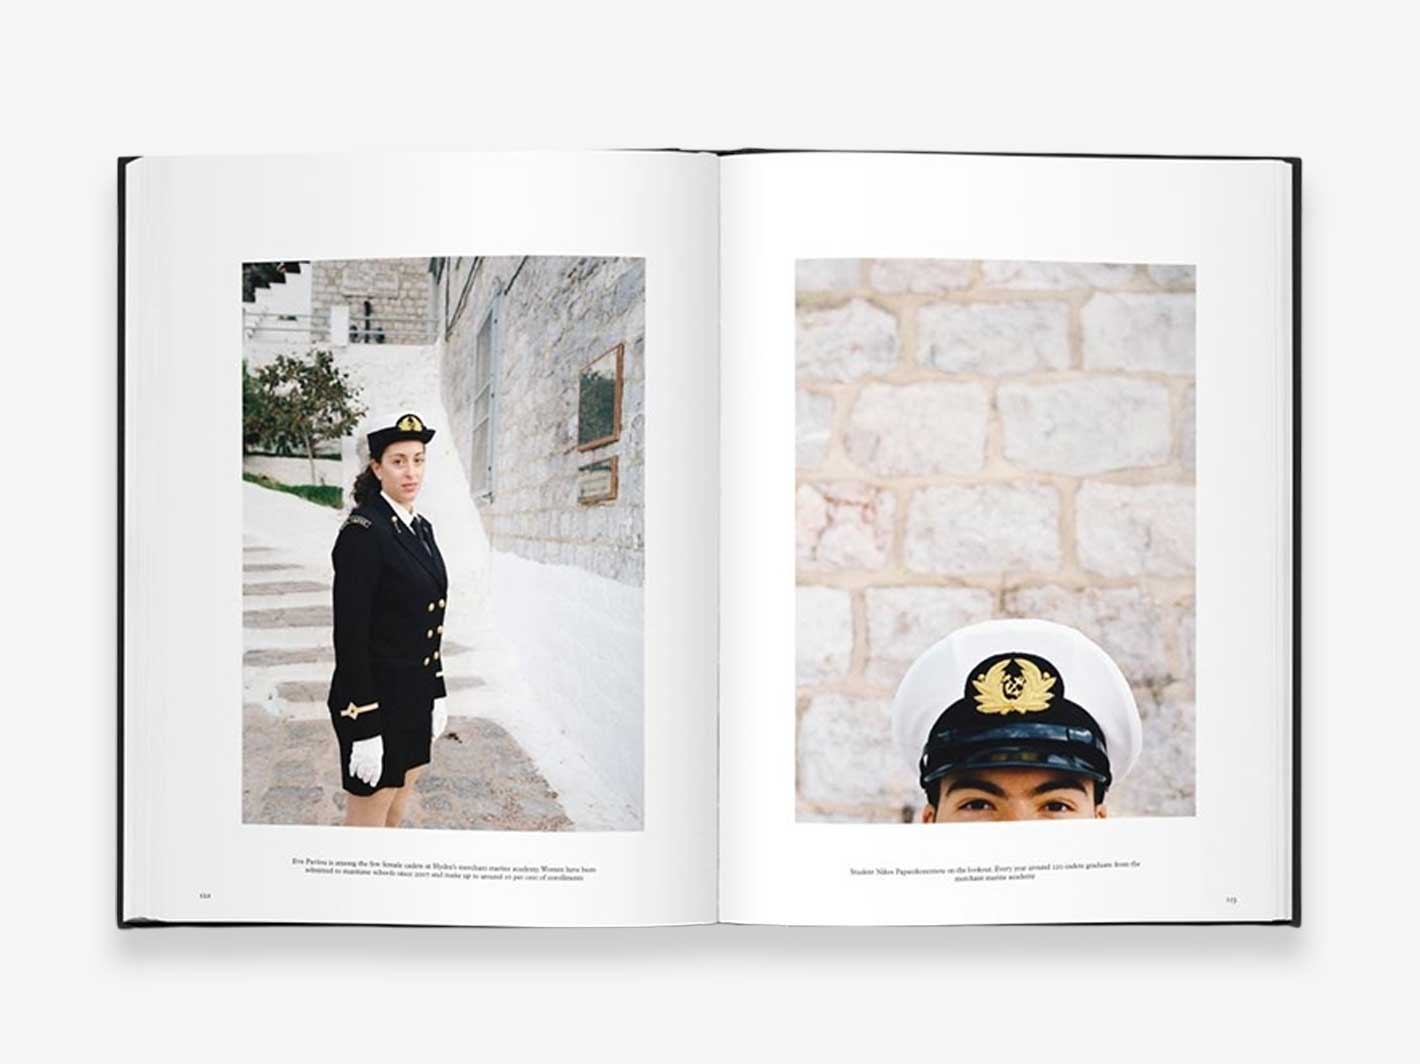 The Monocle Book of Photography